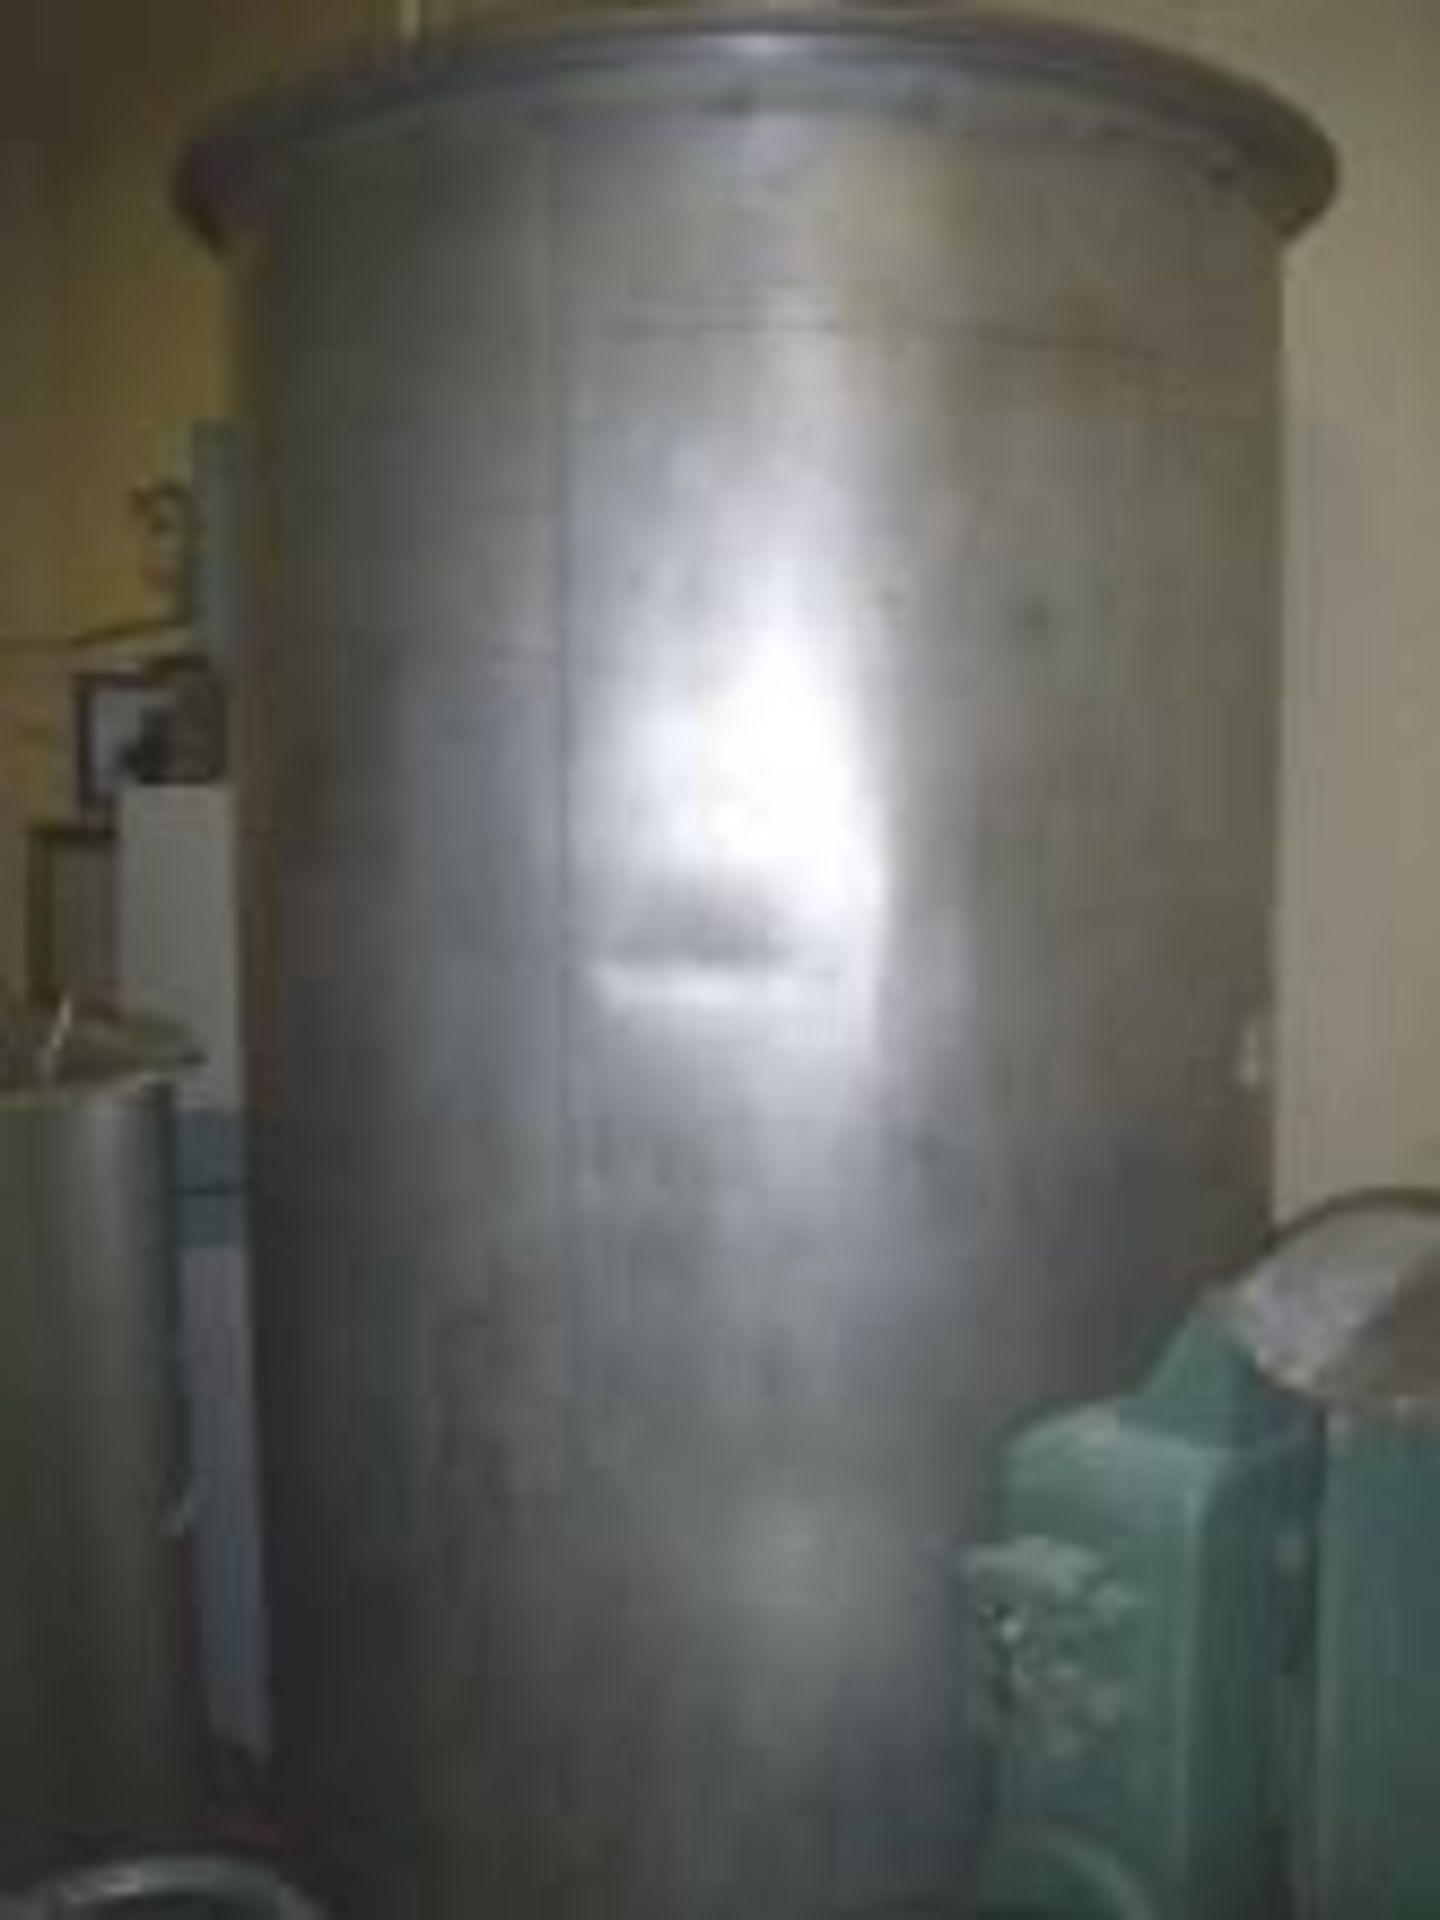 Used 2500 Litre Stainless Steel Single Wall Tank.   Load Out Fee:100